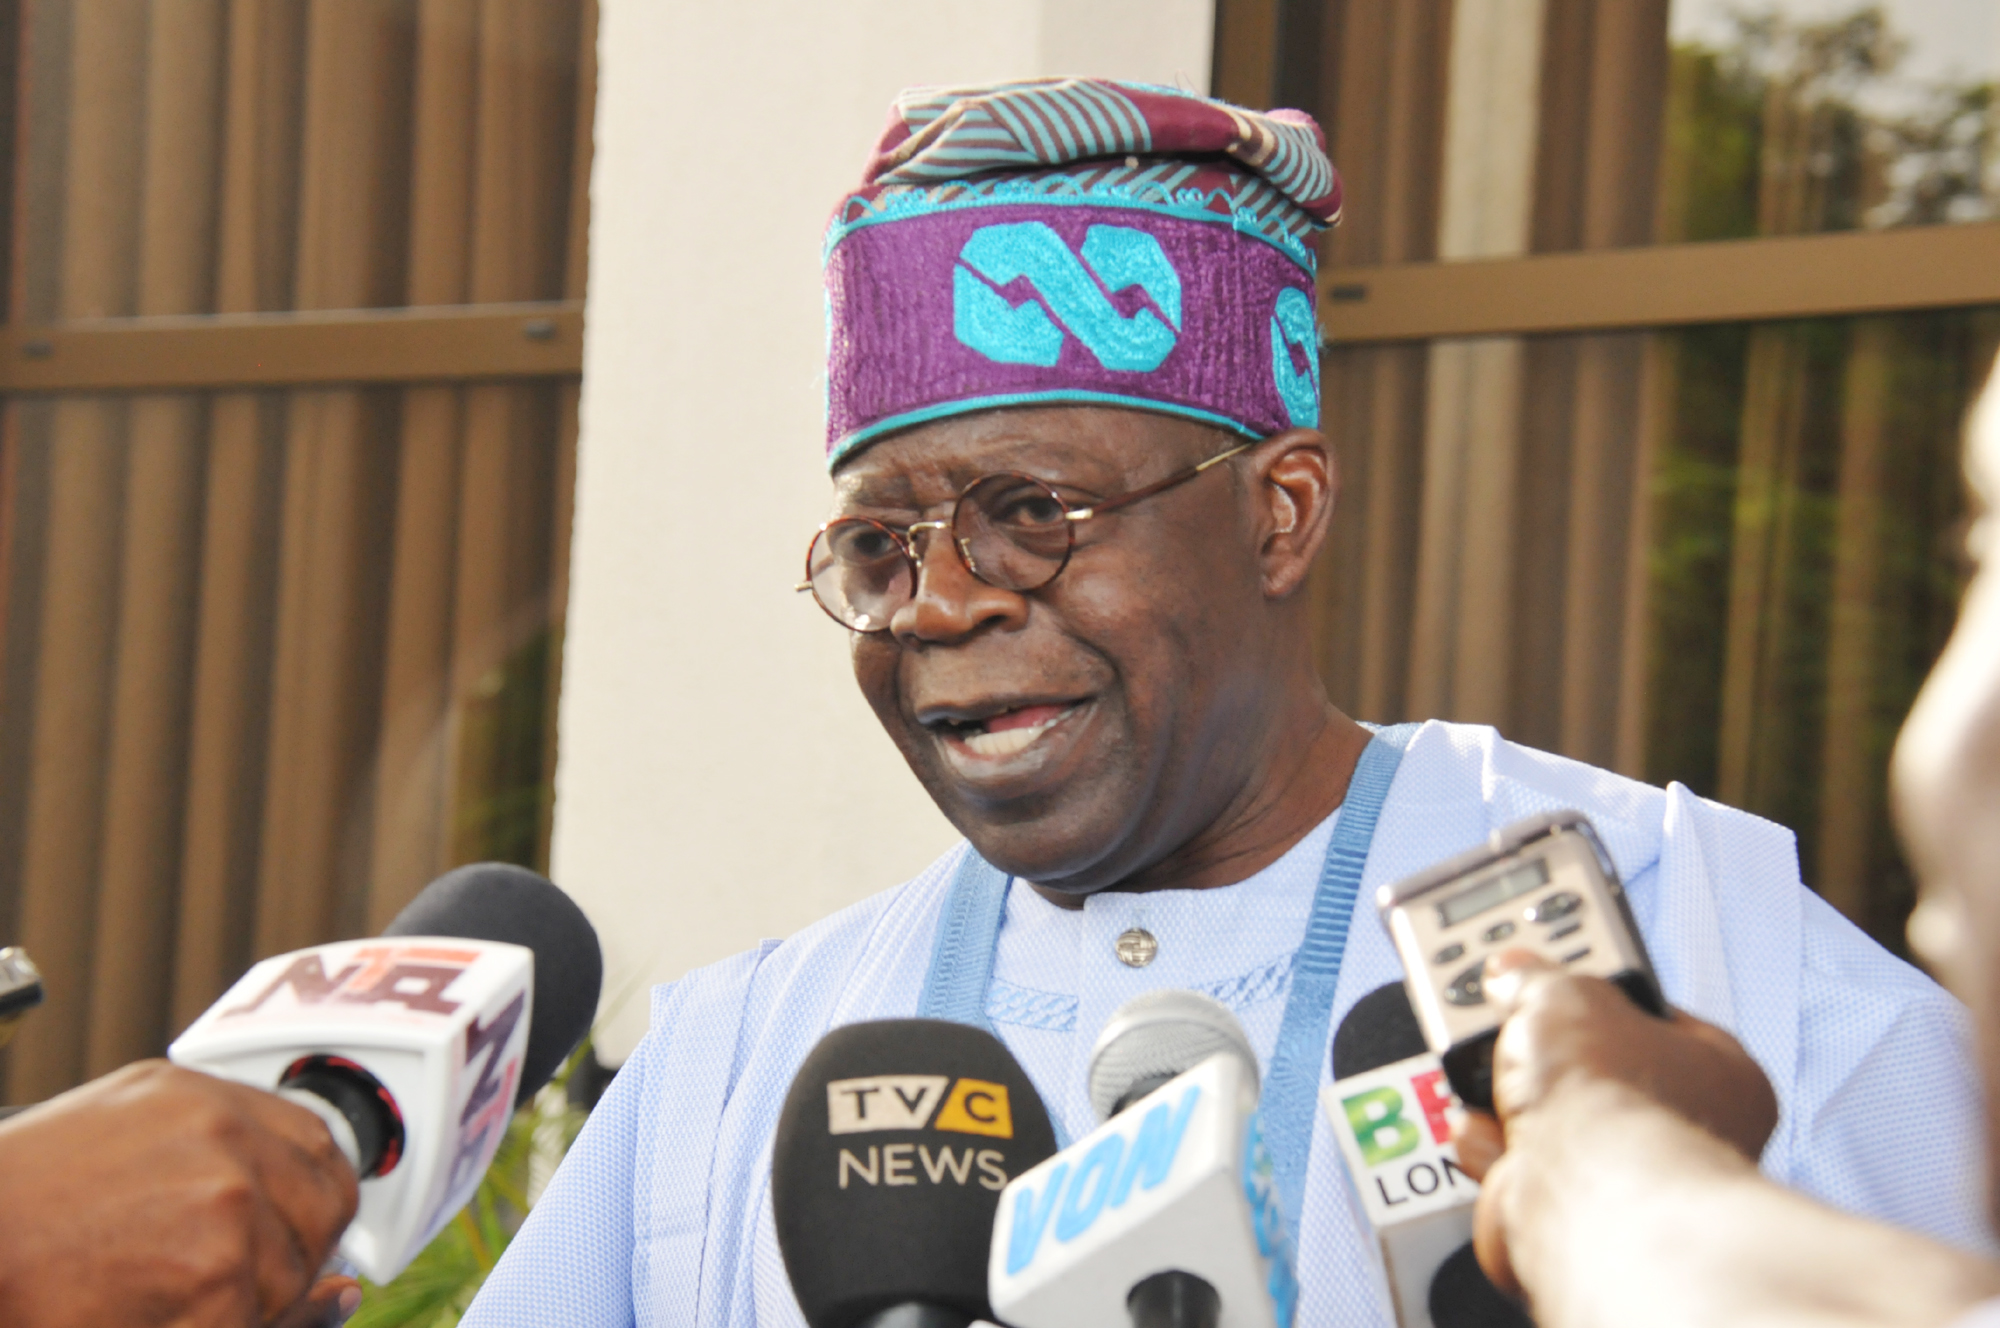 How Tinubu Lost All His Money In U.S. Because Of Drug(Video)